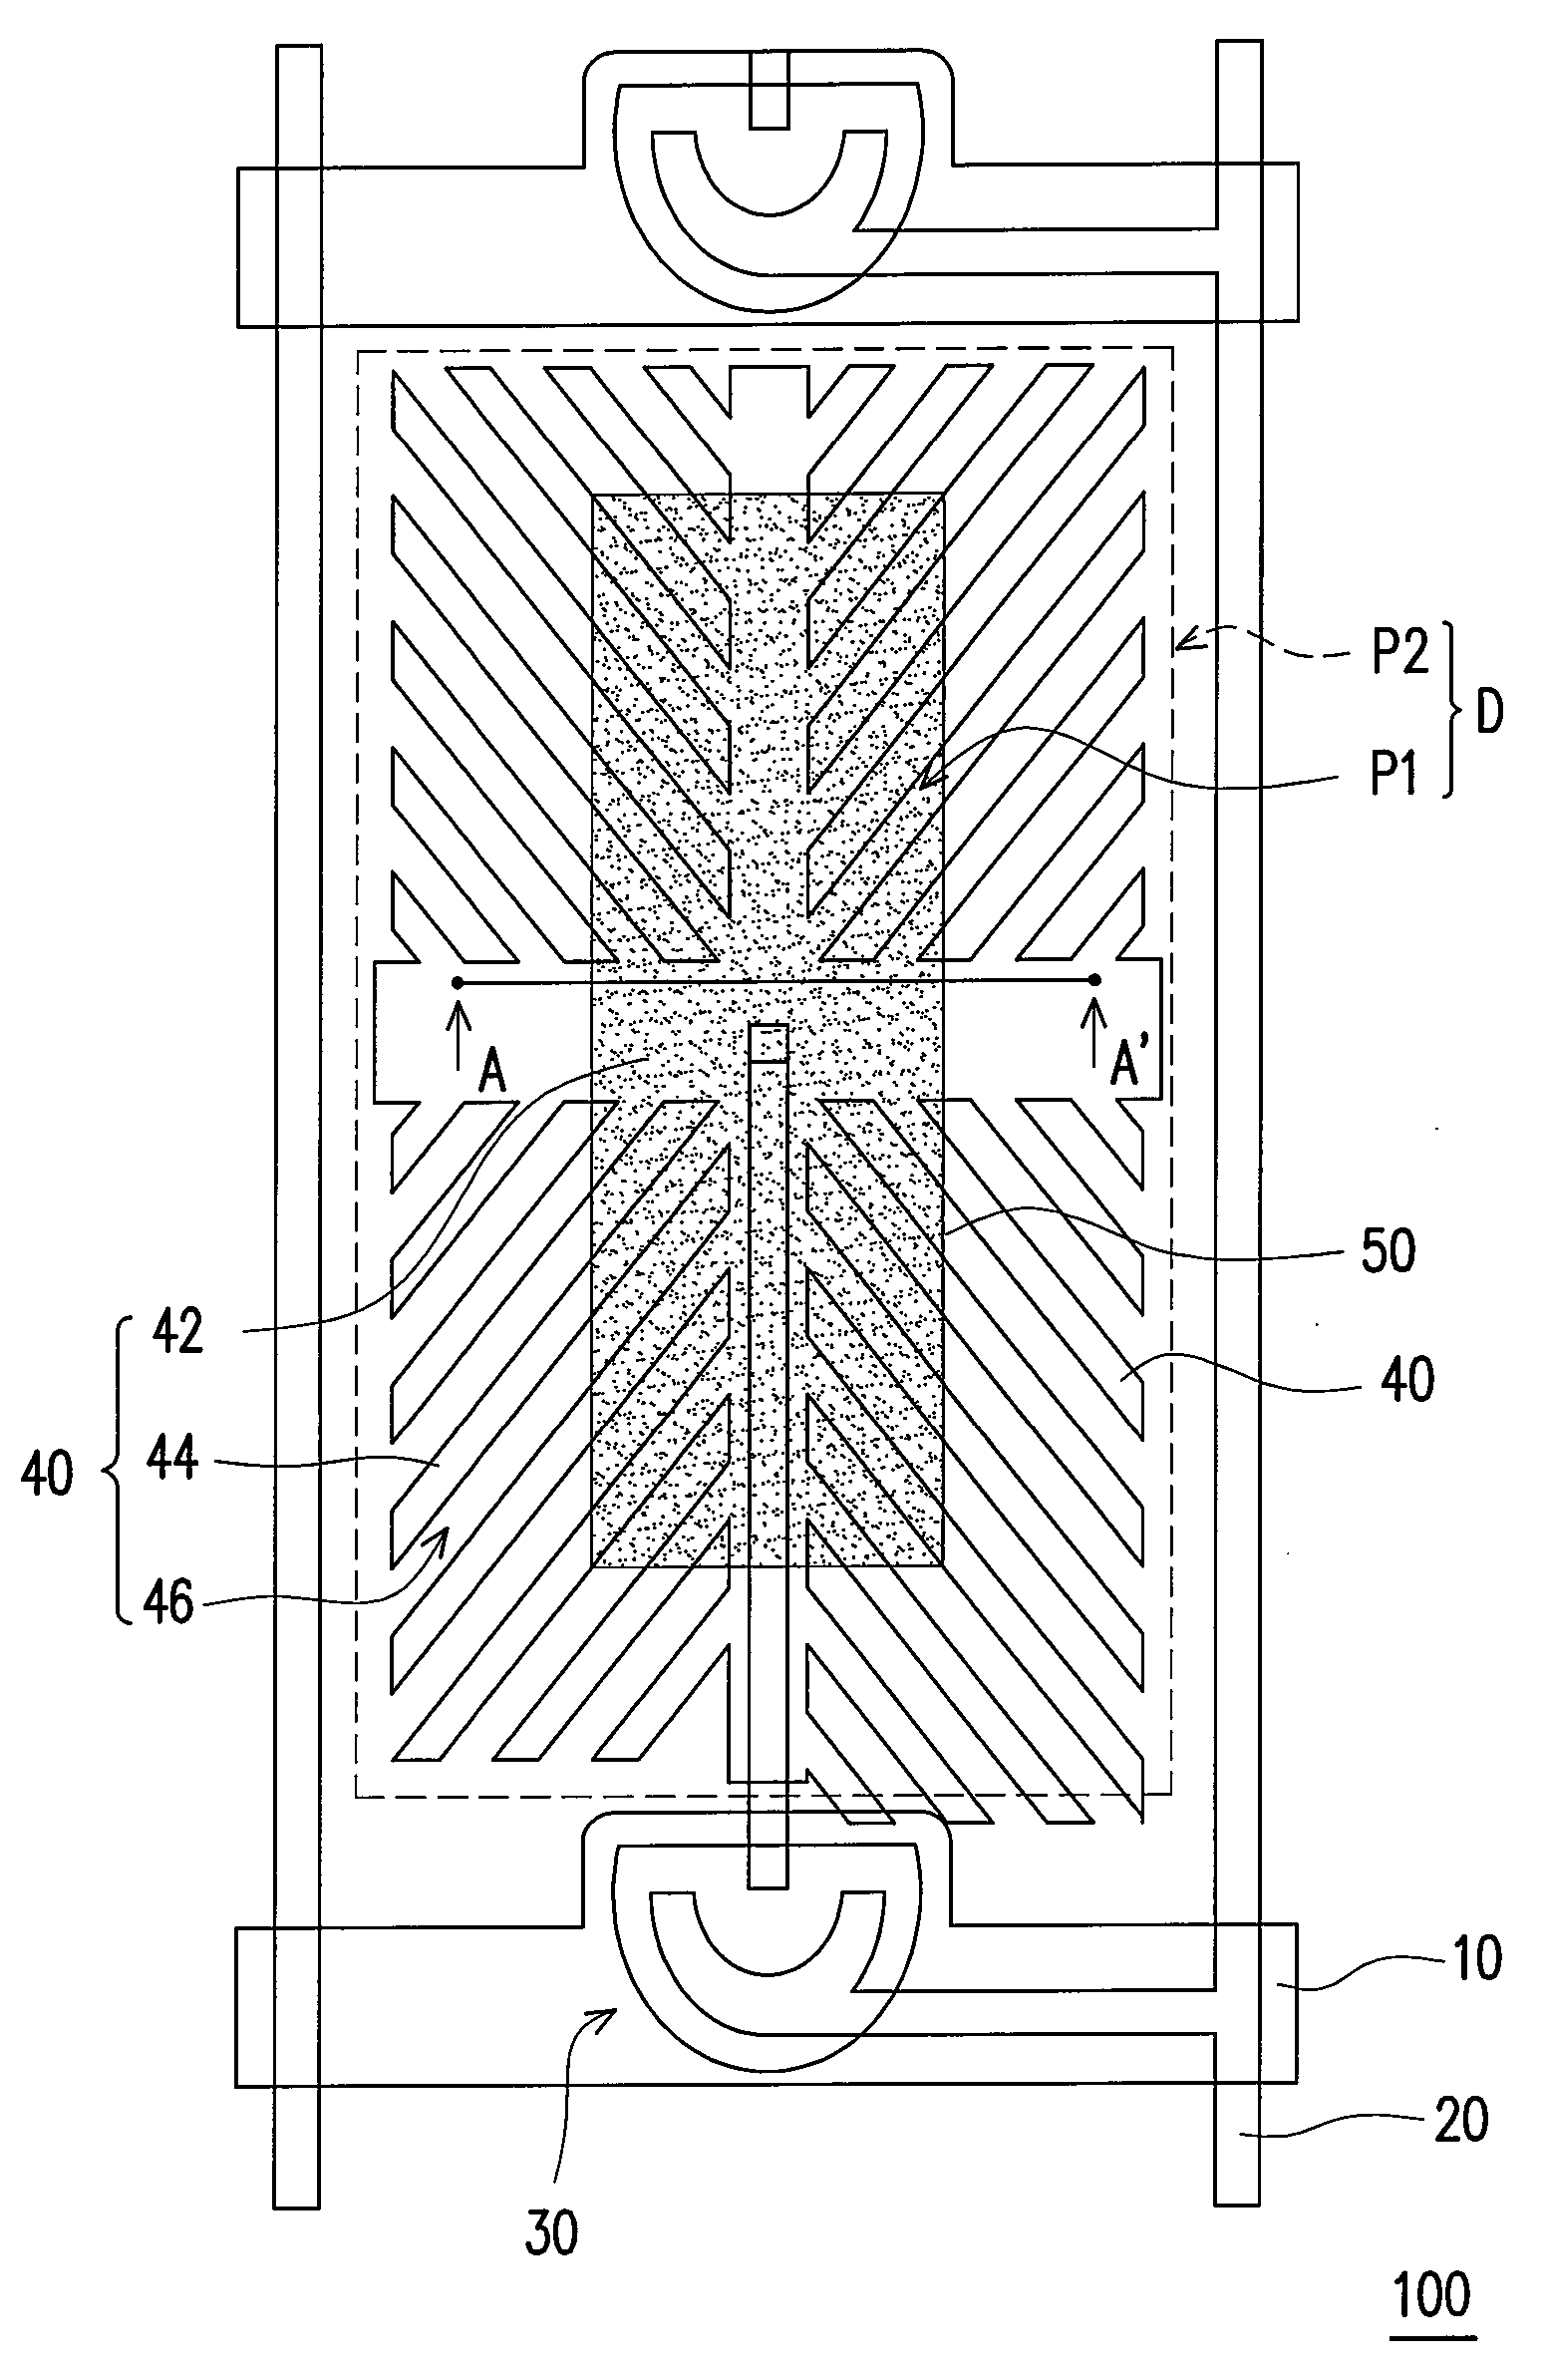 Pixel unit, liquid crystal display panel, electro-optical apparatus, and methods for manufacturing the same